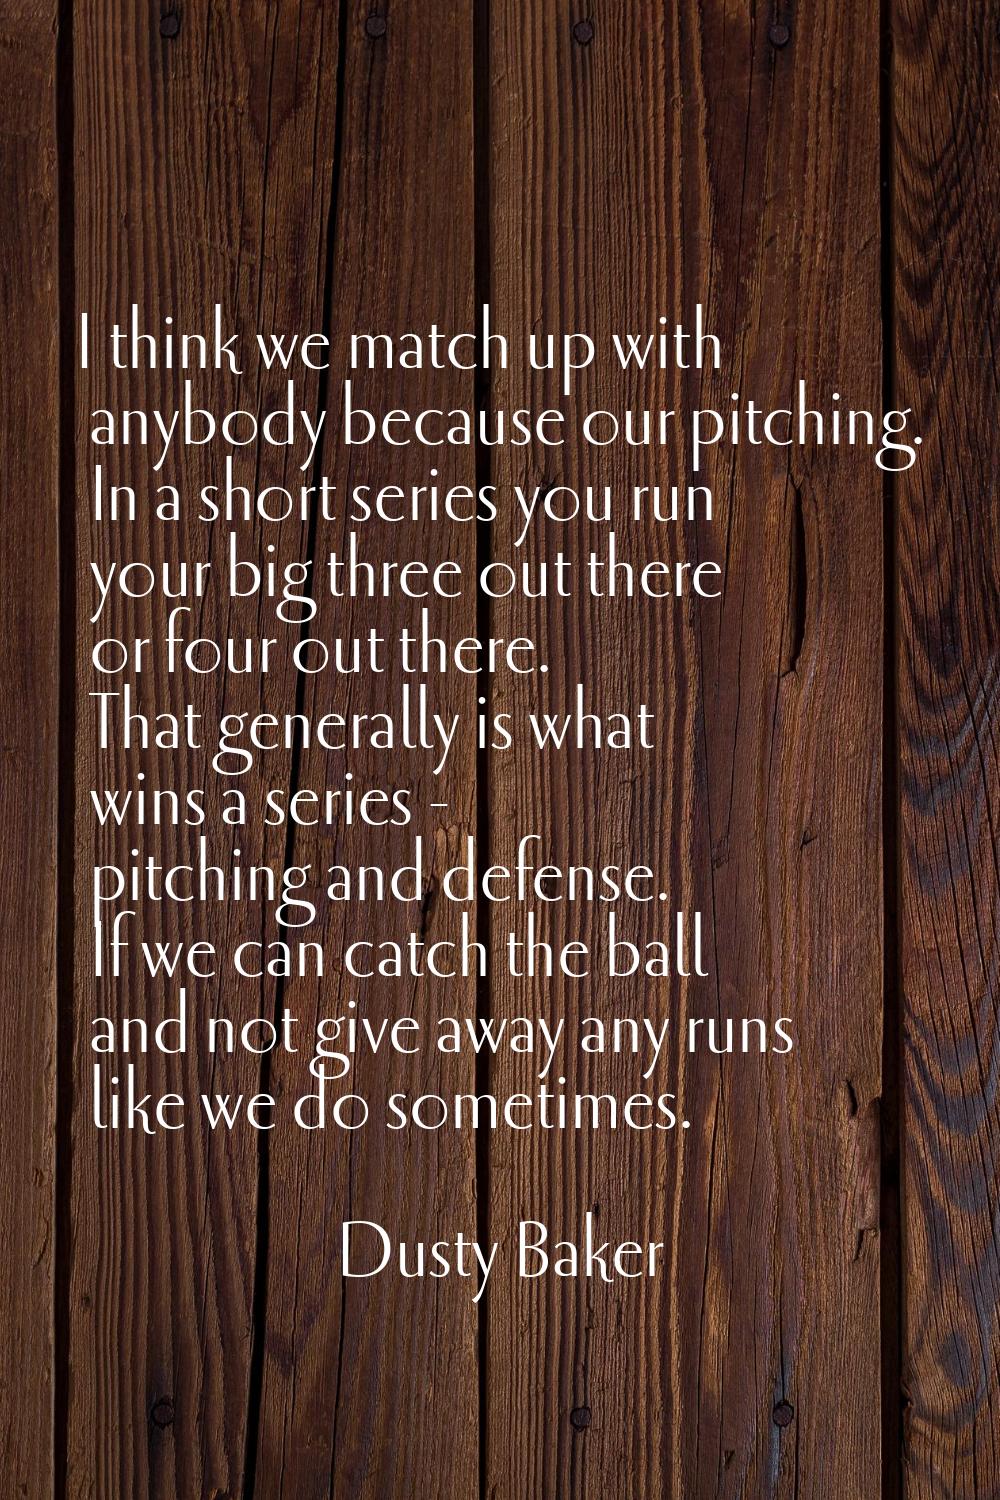 I think we match up with anybody because our pitching. In a short series you run your big three out